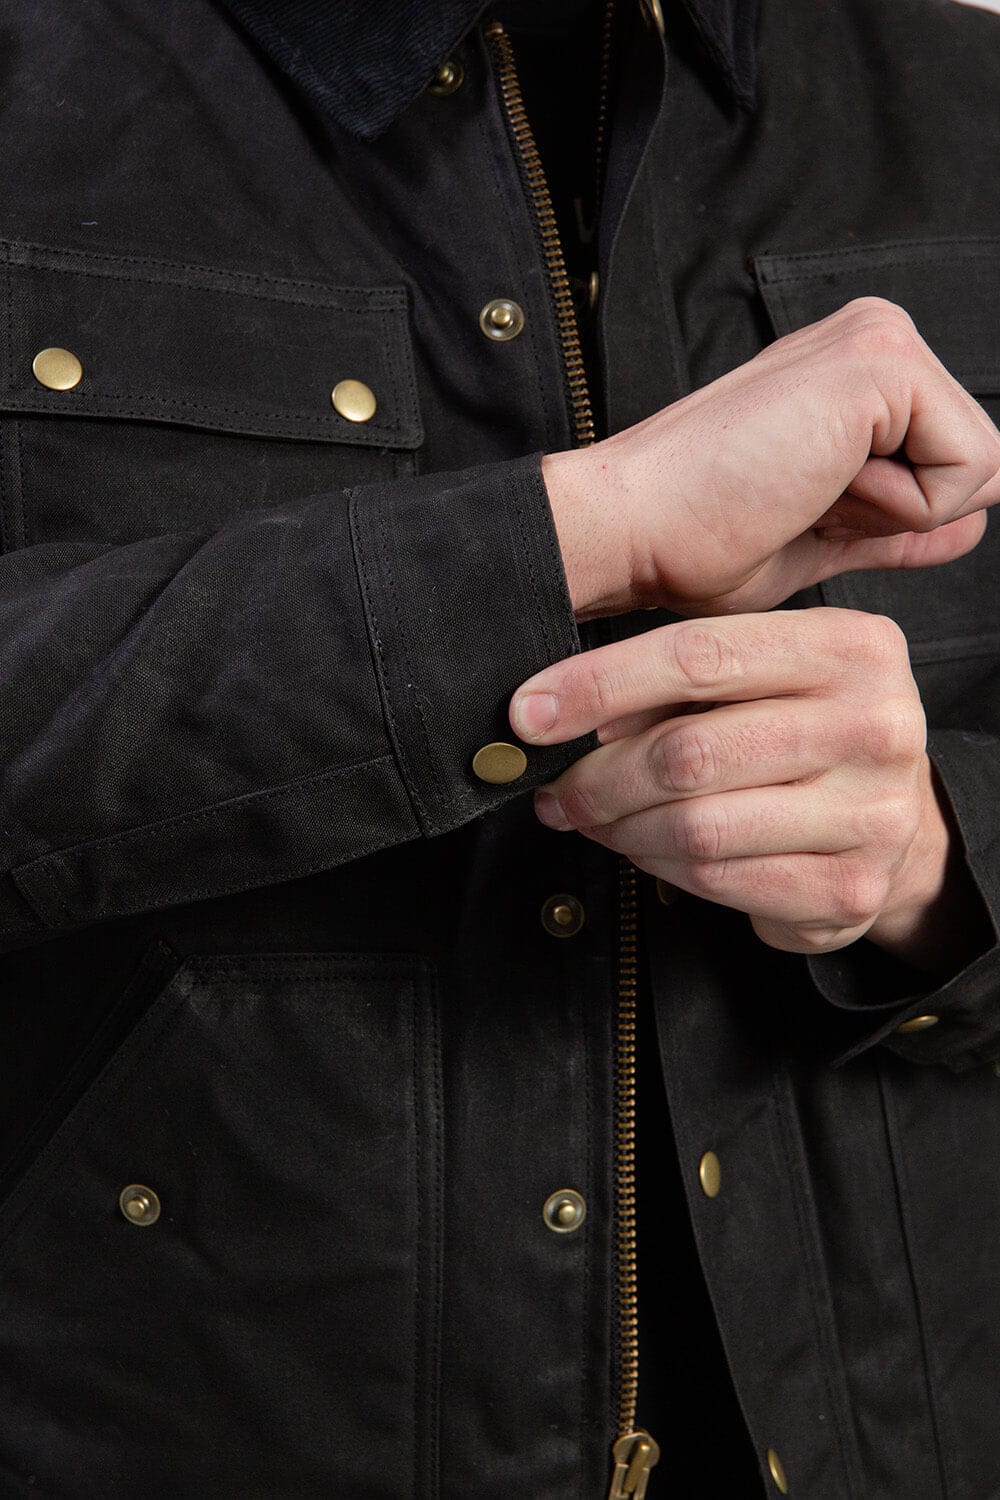 Reversible Trucker Jacket - Black Leather and Suede